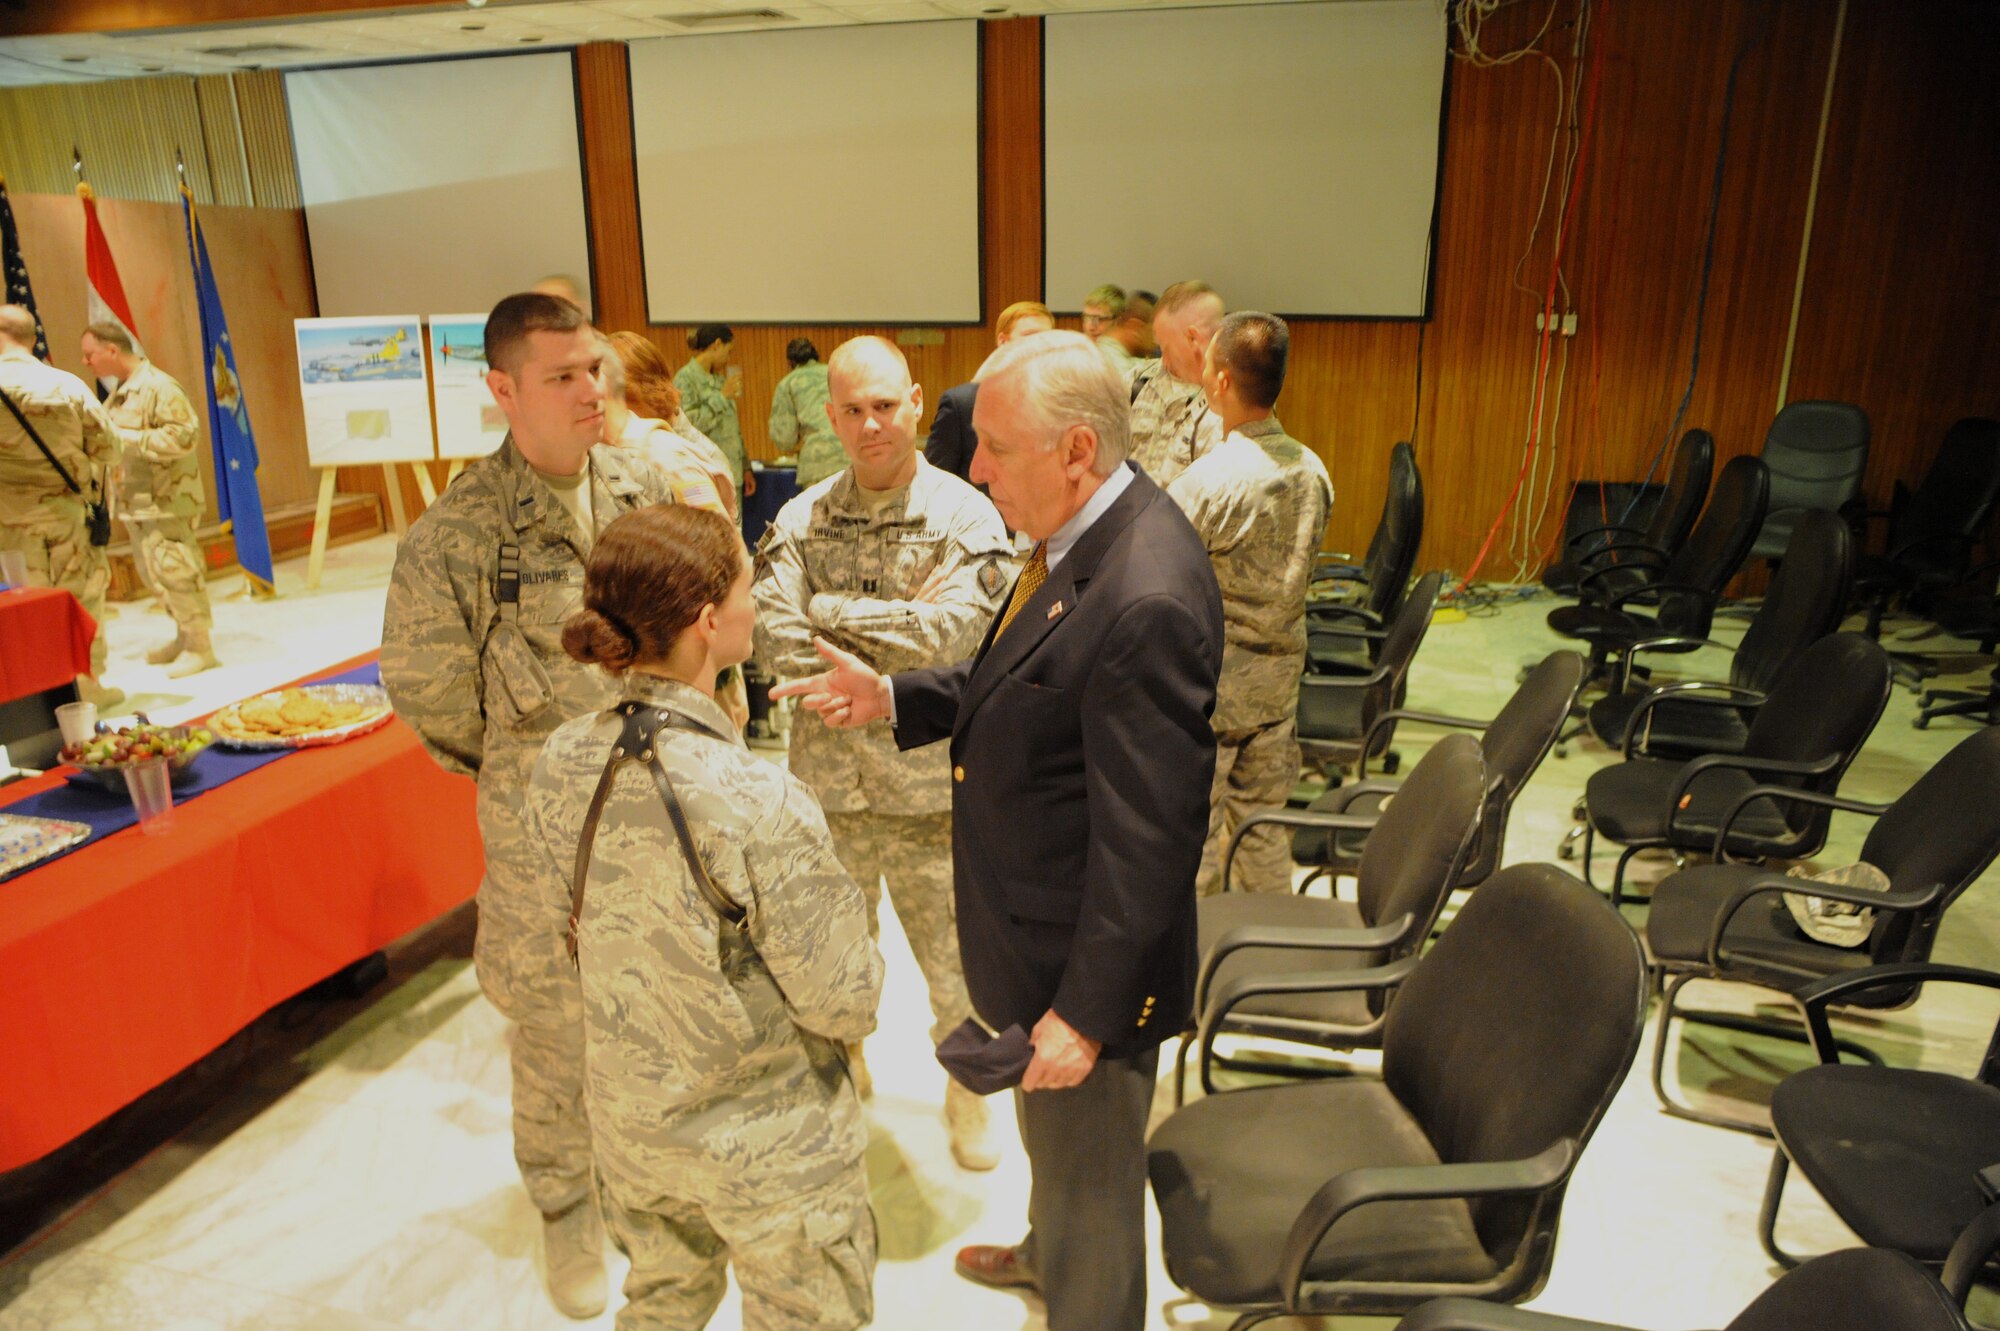 SATHER AIR BASE, Iraq -- Rep. Steny Hoyer (right) speaks with 1st Lt. Julian Olivares (left), 447th Expeditionary Medical Squadron, Army Capt. Zachary Irvine, and 1st Lt. Emily Cole, 447th Expeditionary Operations Support Squadron during a visit with deployed Airmen and Soldiers here May 17. (U.S. Air Force photo/Tech. Sgt. Amanda Callahan)